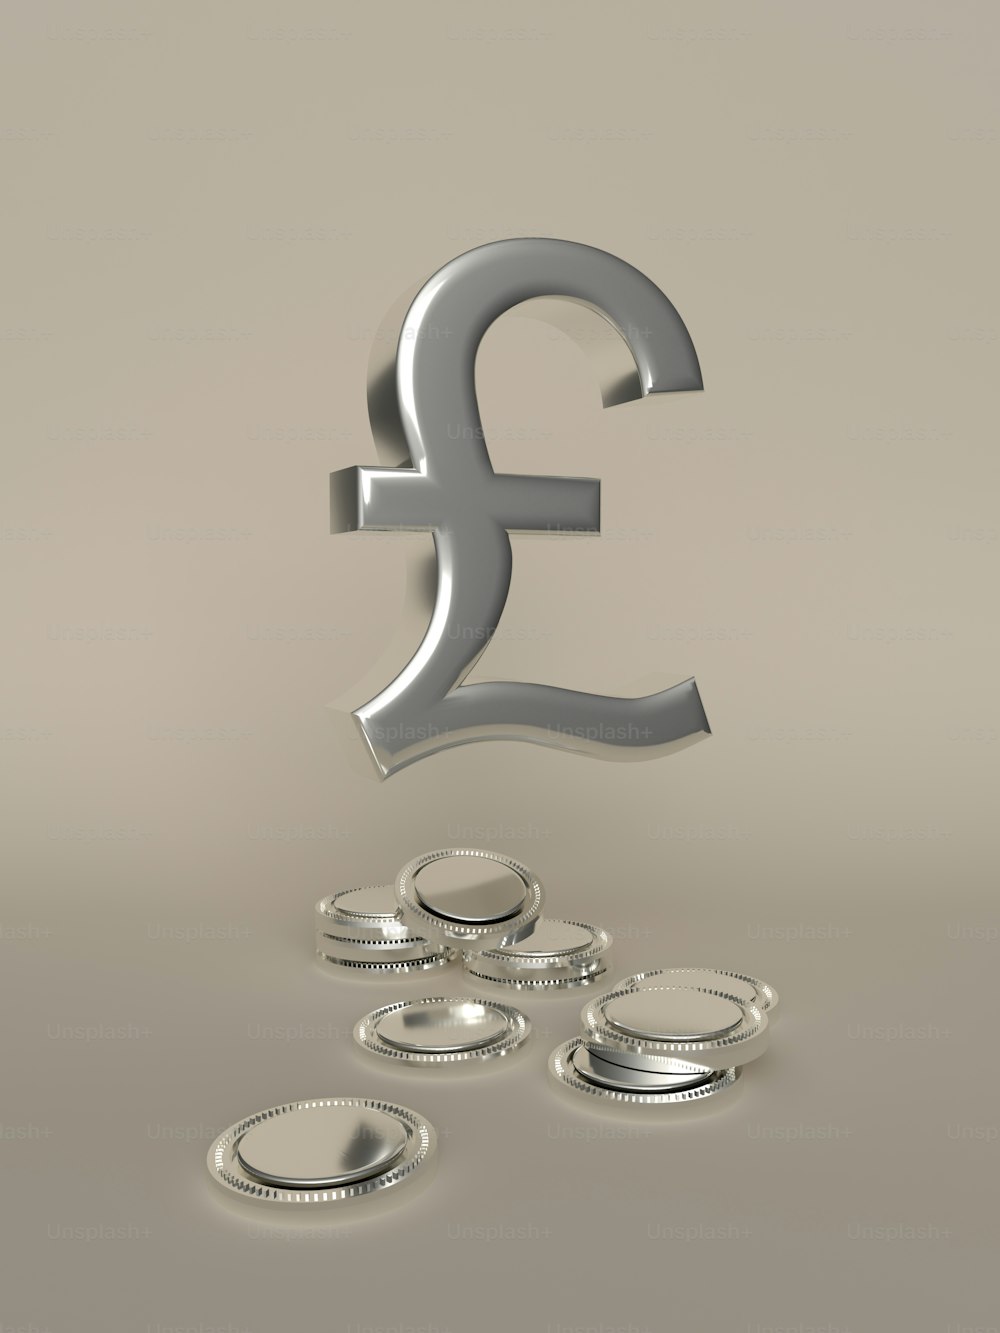 a silver pound sign surrounded by coins